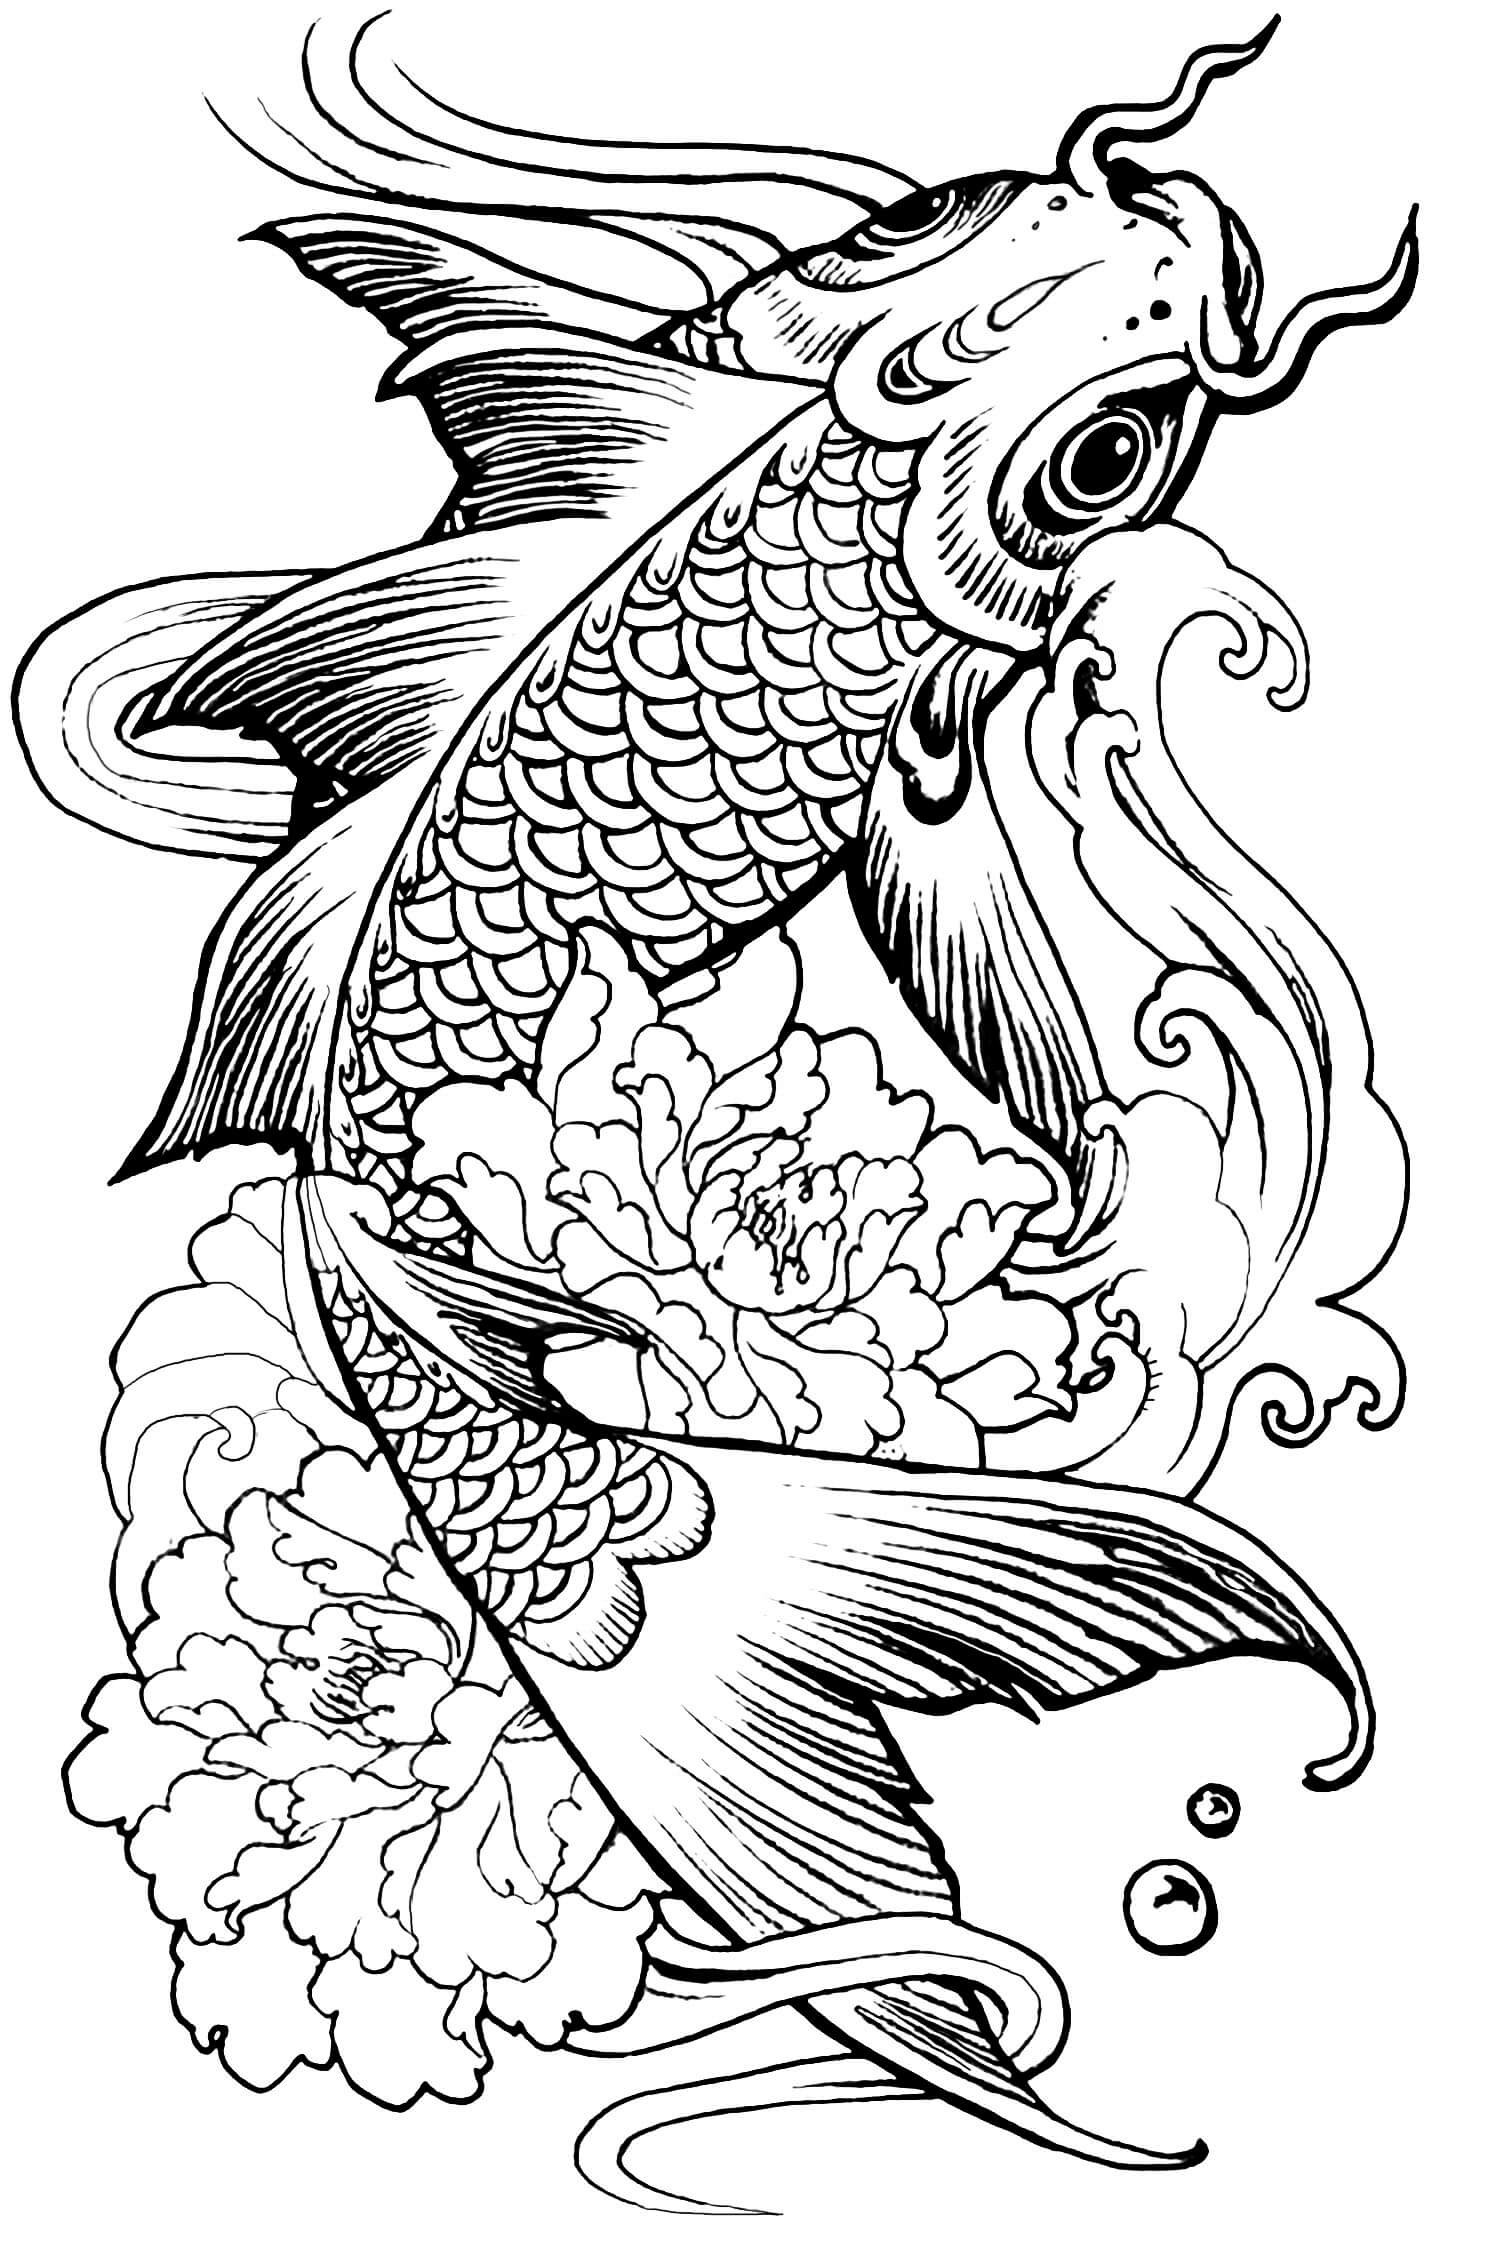 Coloring Pages For Adults Difficult Animals
 Coloring Pages For Adults Difficult Animals 35